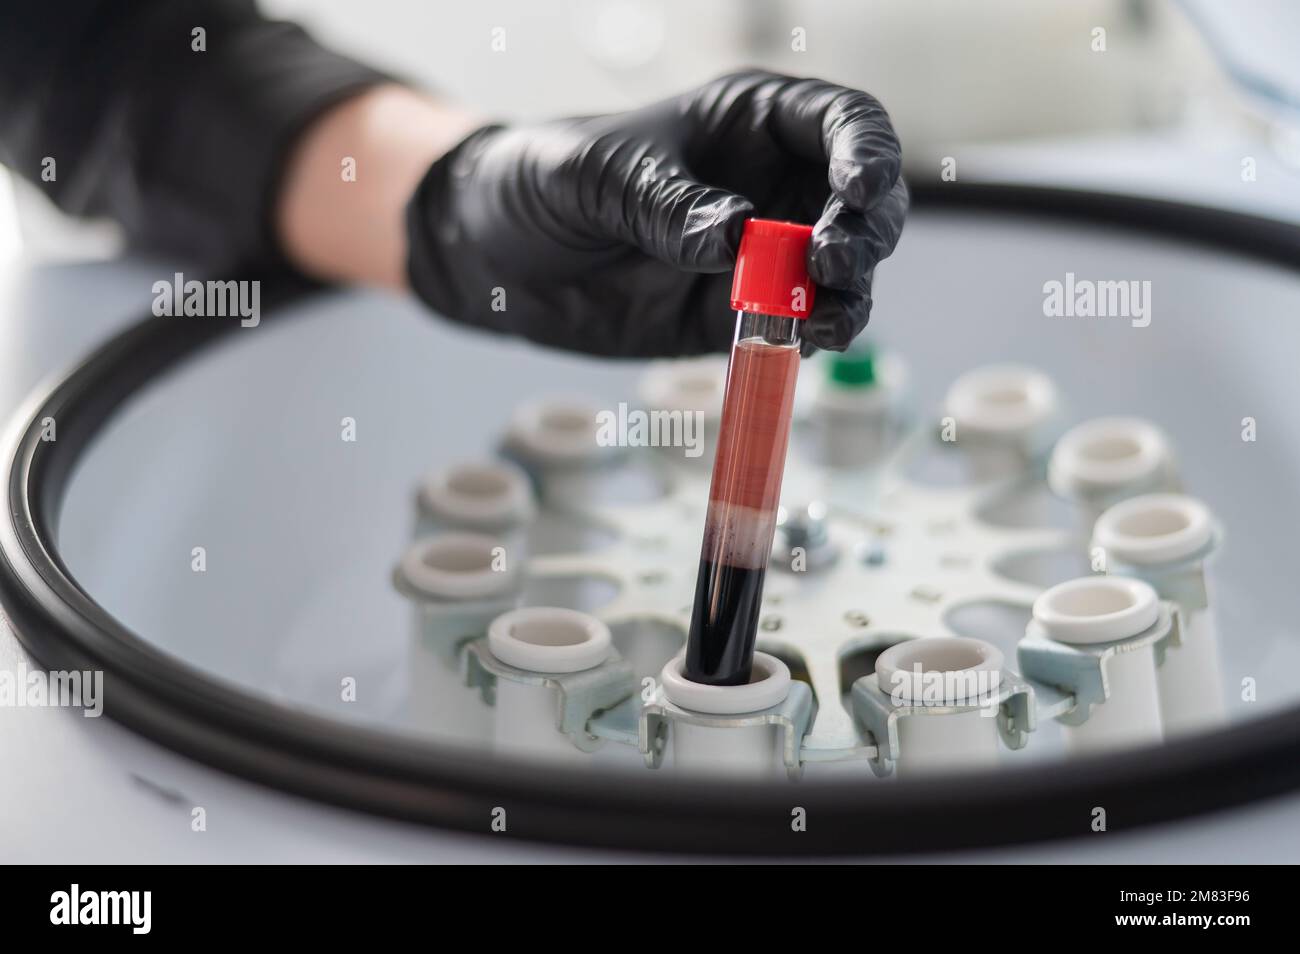 The doctor takes out a test tube with blood plasma from the centrifuge. Plasma lifting procedure for skin rejuvenation. Stock Photo